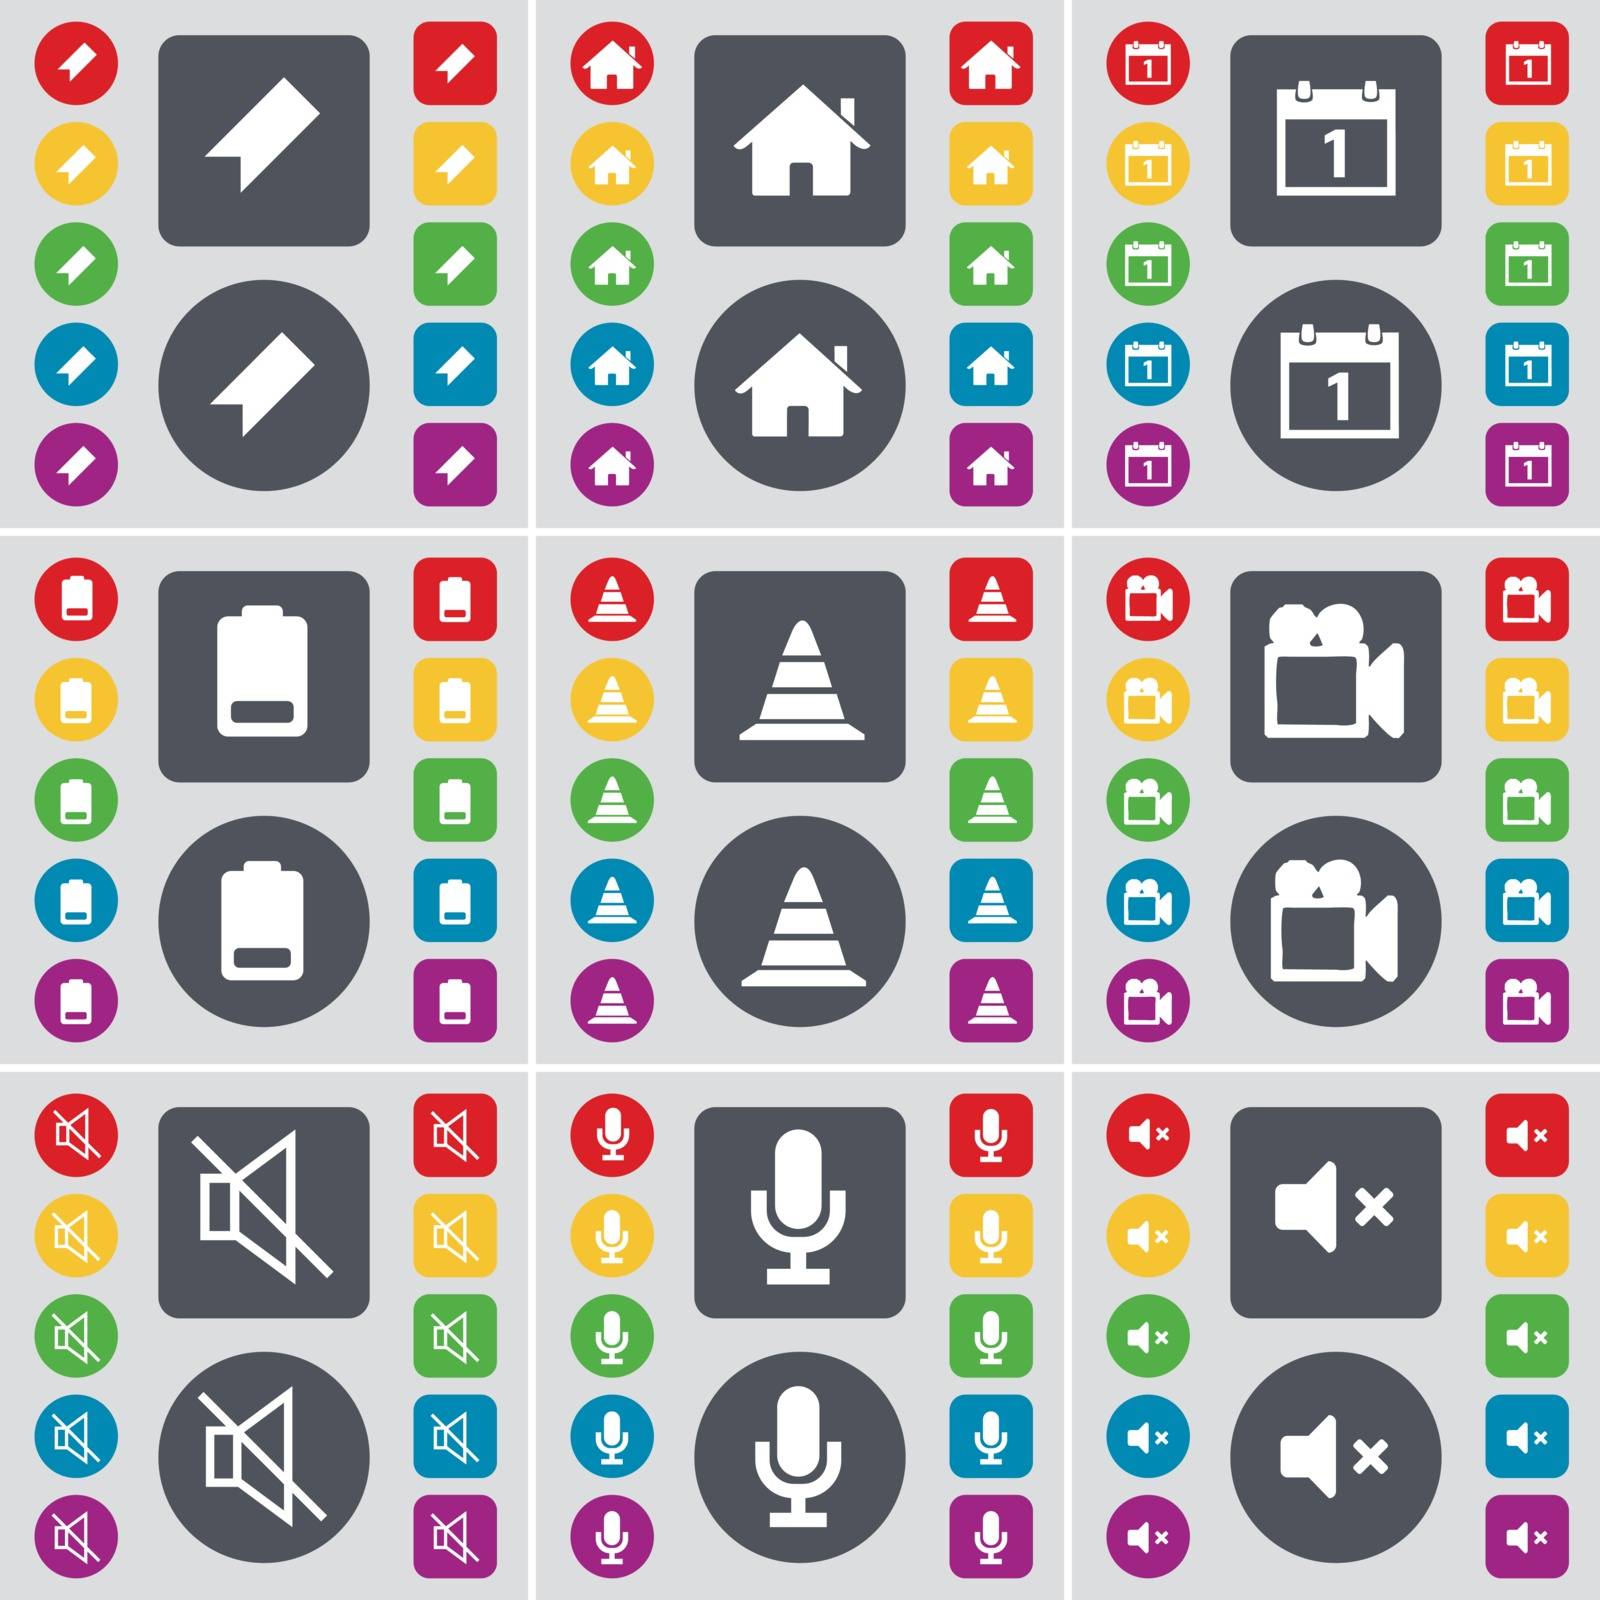 Marker, House, Calendar, Battery, Cone, Film camera, Mute, Microphone, Mute icon symbol. A large set of flat, colored buttons for your design. Vector illustration